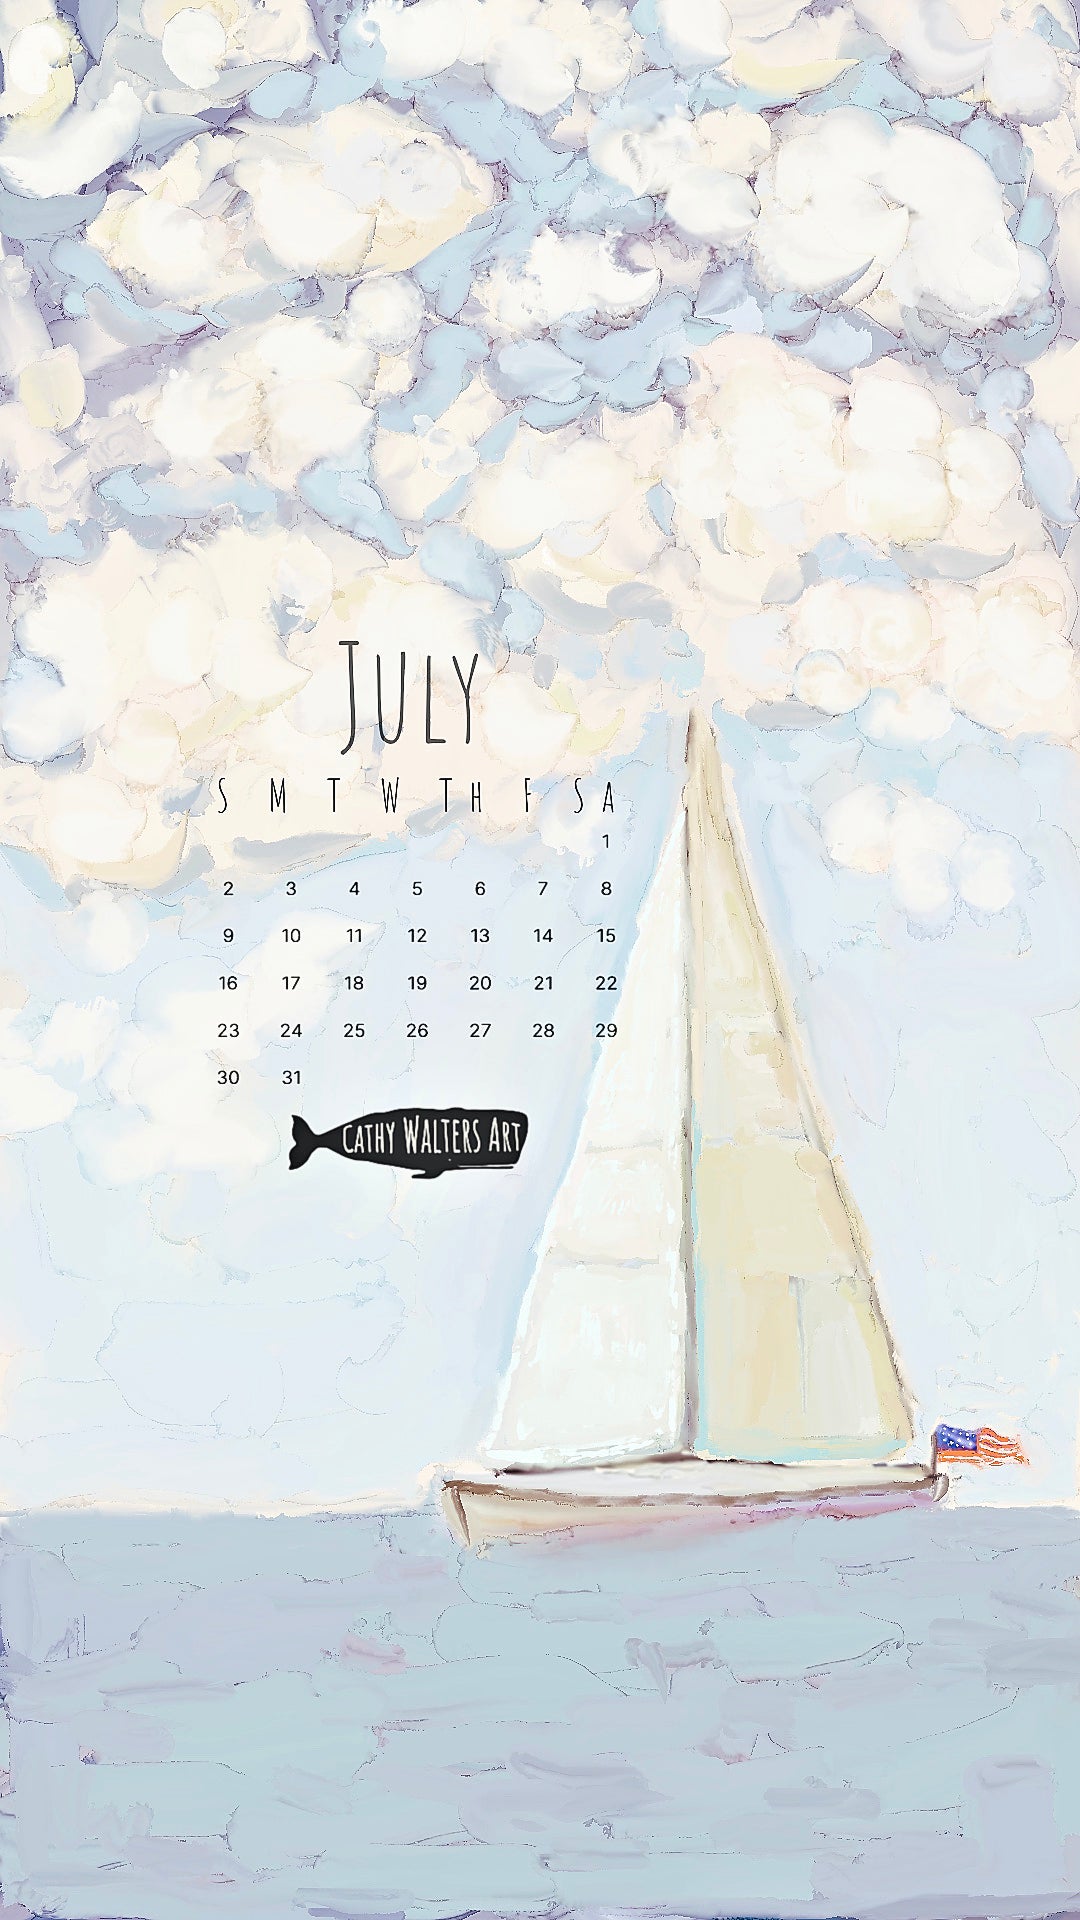 The Free July 2023 iPhone Wallpaper is now available!